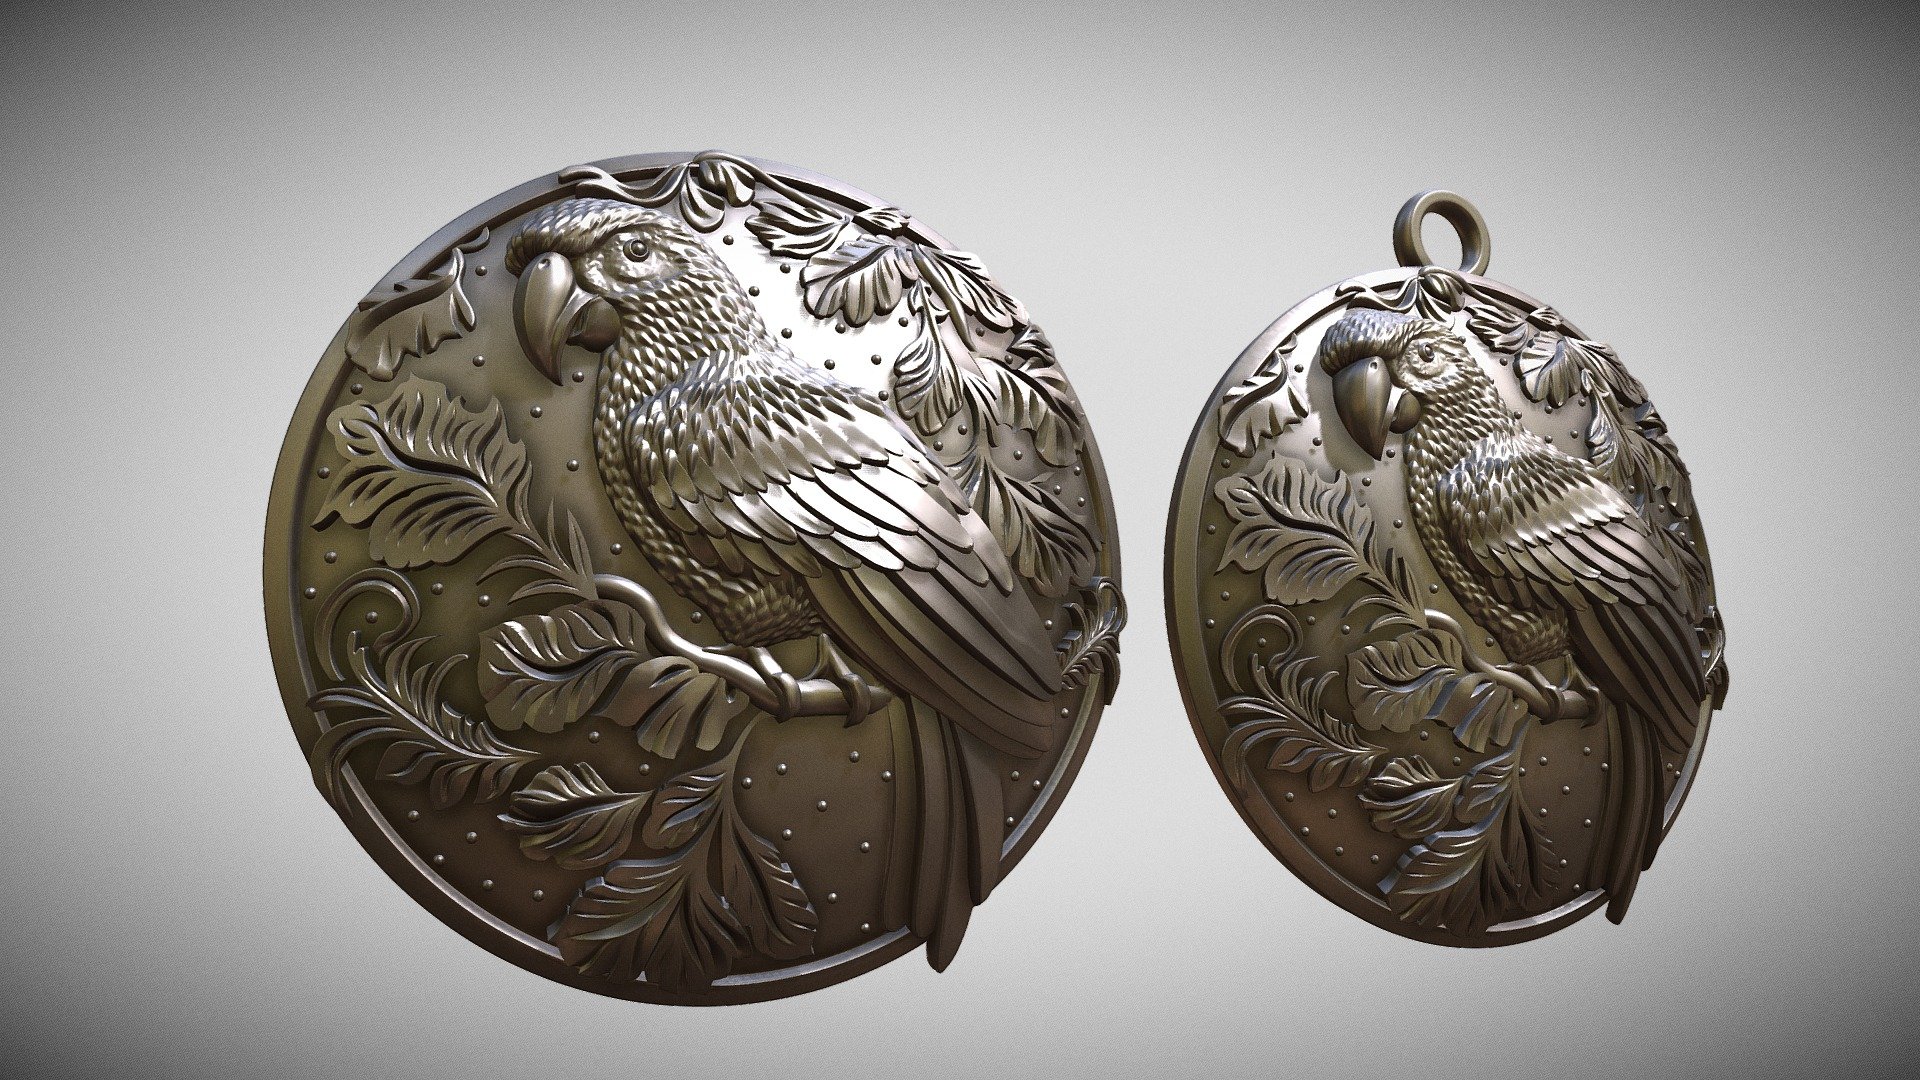 The parrot BAS-RELIEF medallion is made as a single element. I set the size to 45mm in diameter. The model has a high resolution, and you can change the size as you wish.
Please note that the model has two options with and without a hanging eye.

Model geometry is mesh (polygonal),this is not a Nurbs geometry.
It is designed for printing and casting and technically cannot be converted to NURBS geometry 3d model